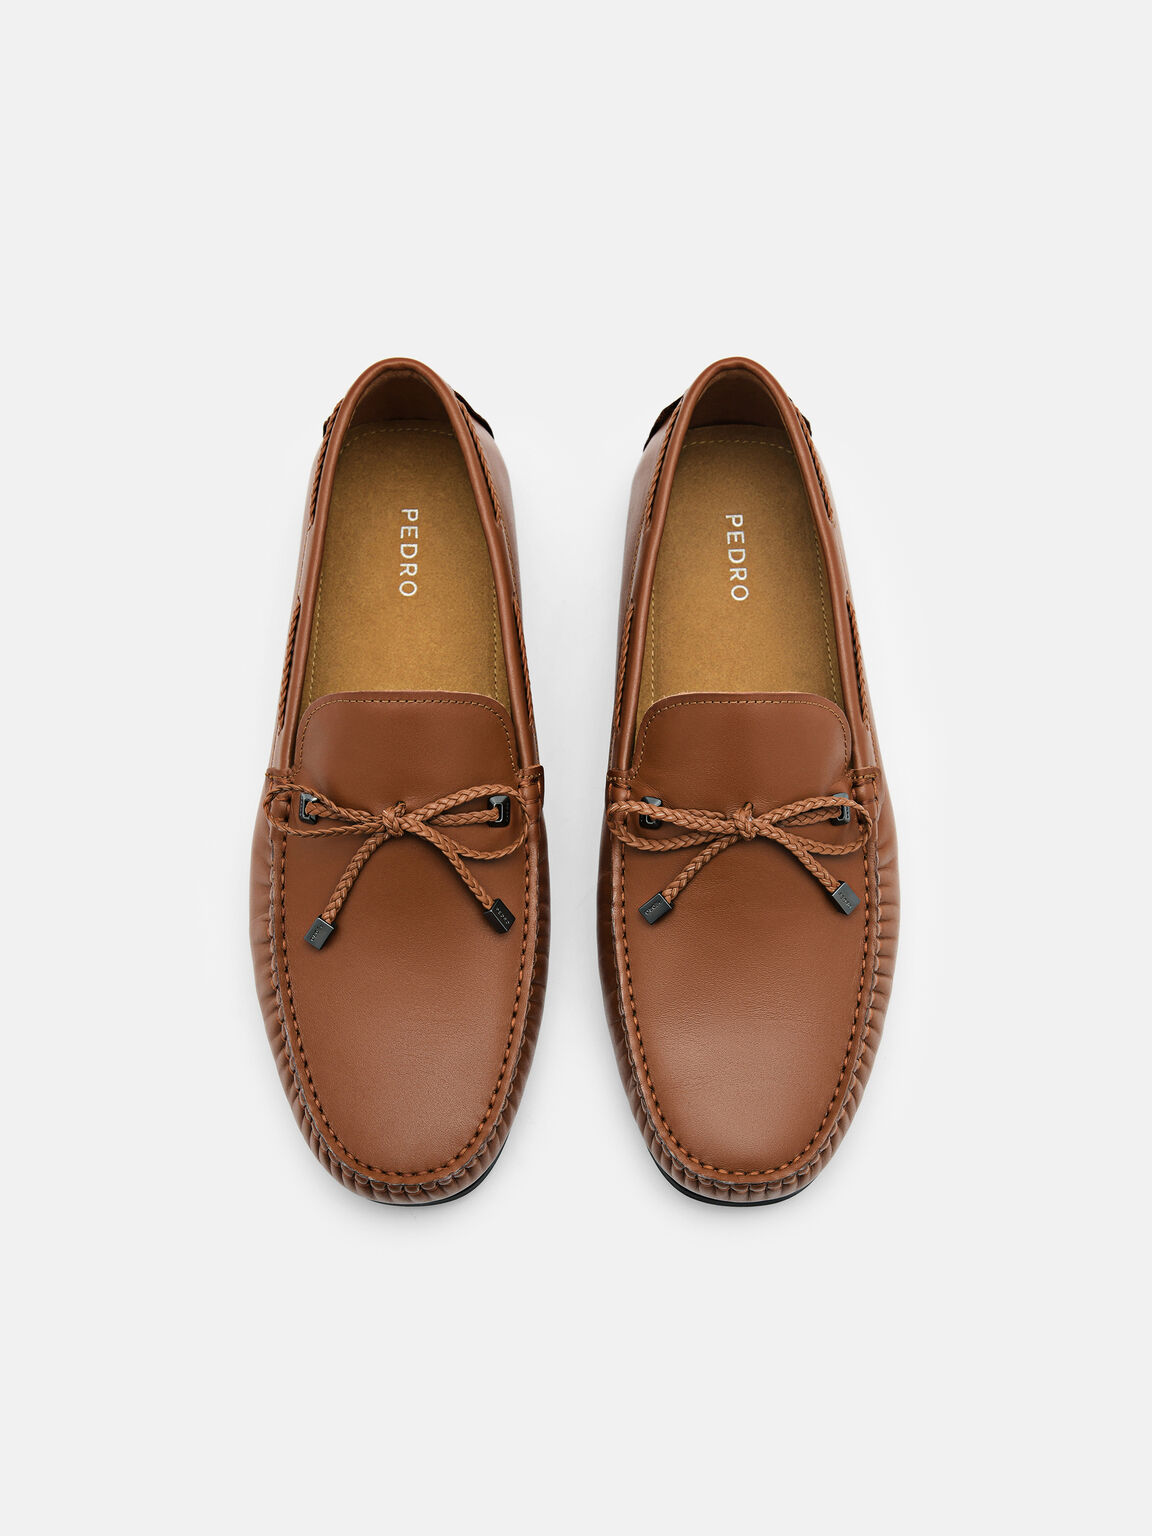 Leather Bow Driving Shoes, Cognac